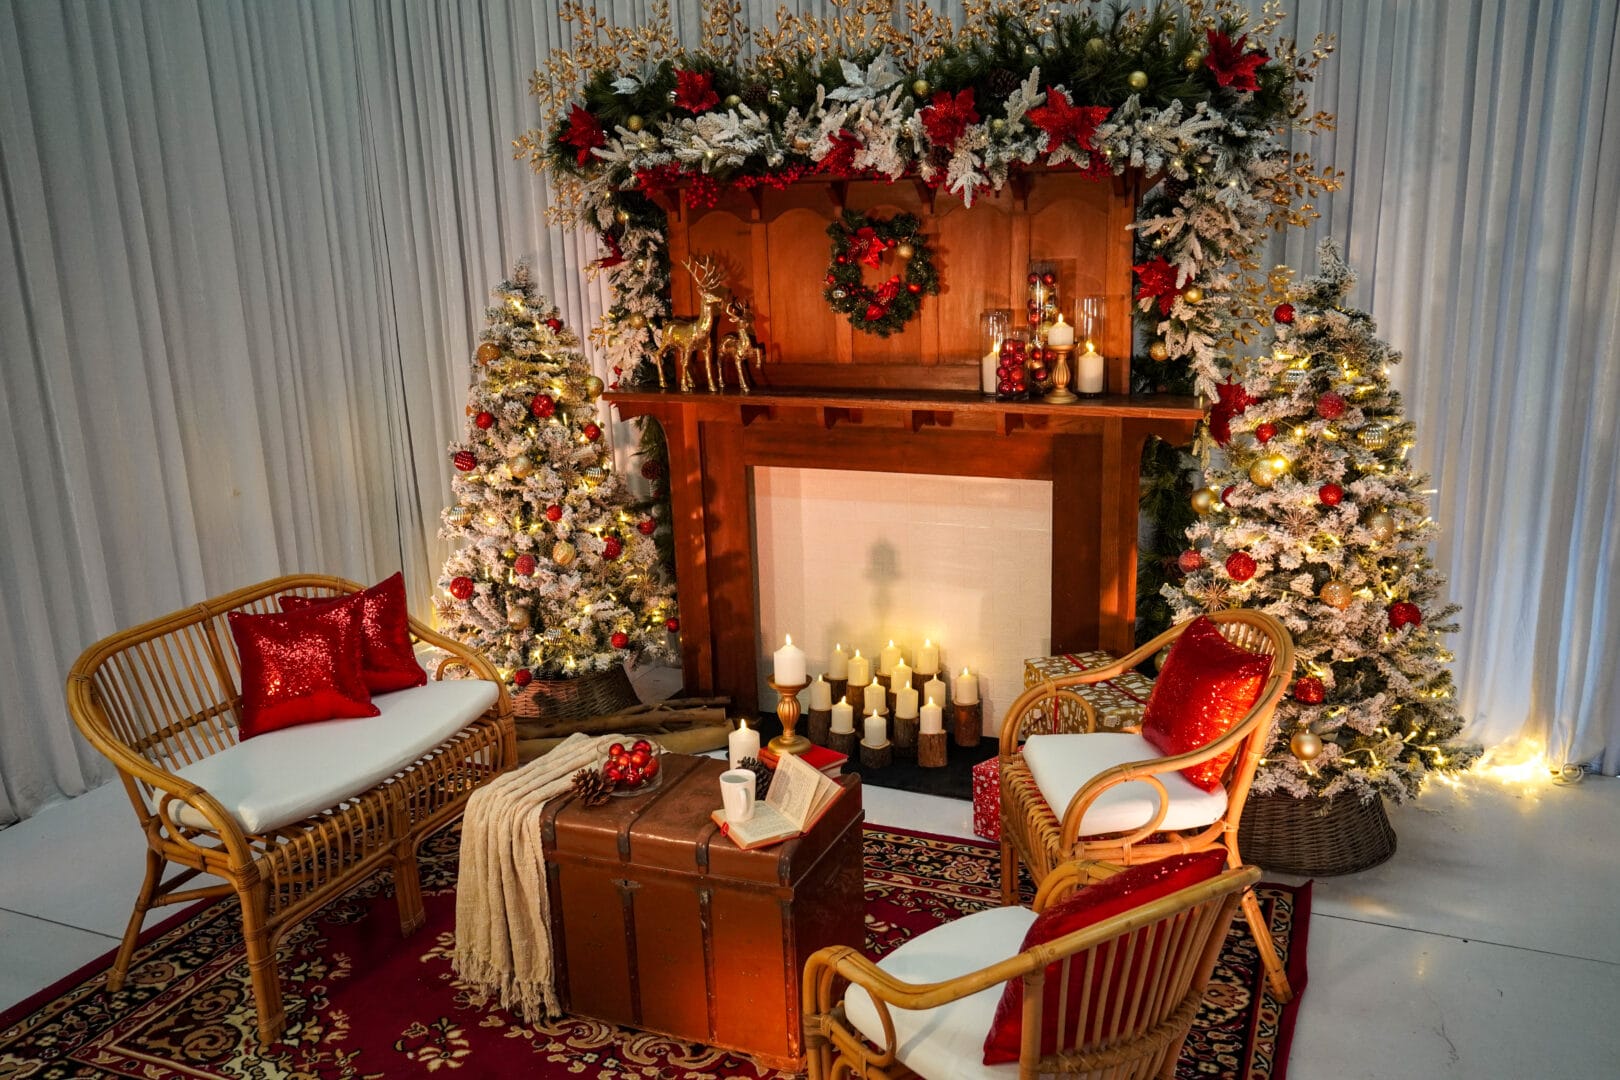 christmas themed setup featuring white frosted pine trees, ornaments, rattan furniture, and red cushions